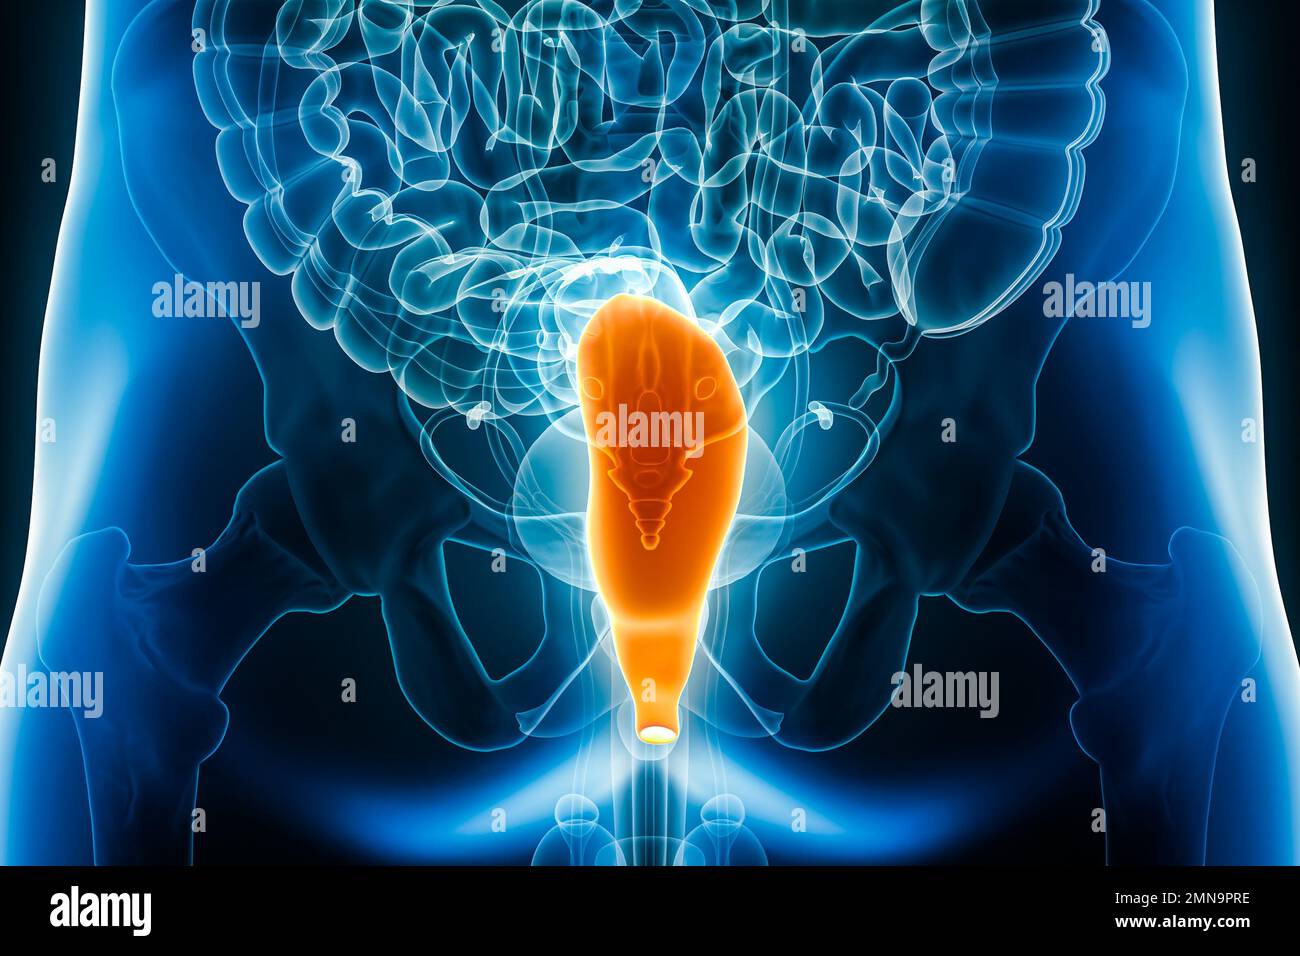 Posterior xray view of the rectum, part of the large intestine 3D rendering illustration with male body contours. Human anatomy, digestive system orga Stock Photo